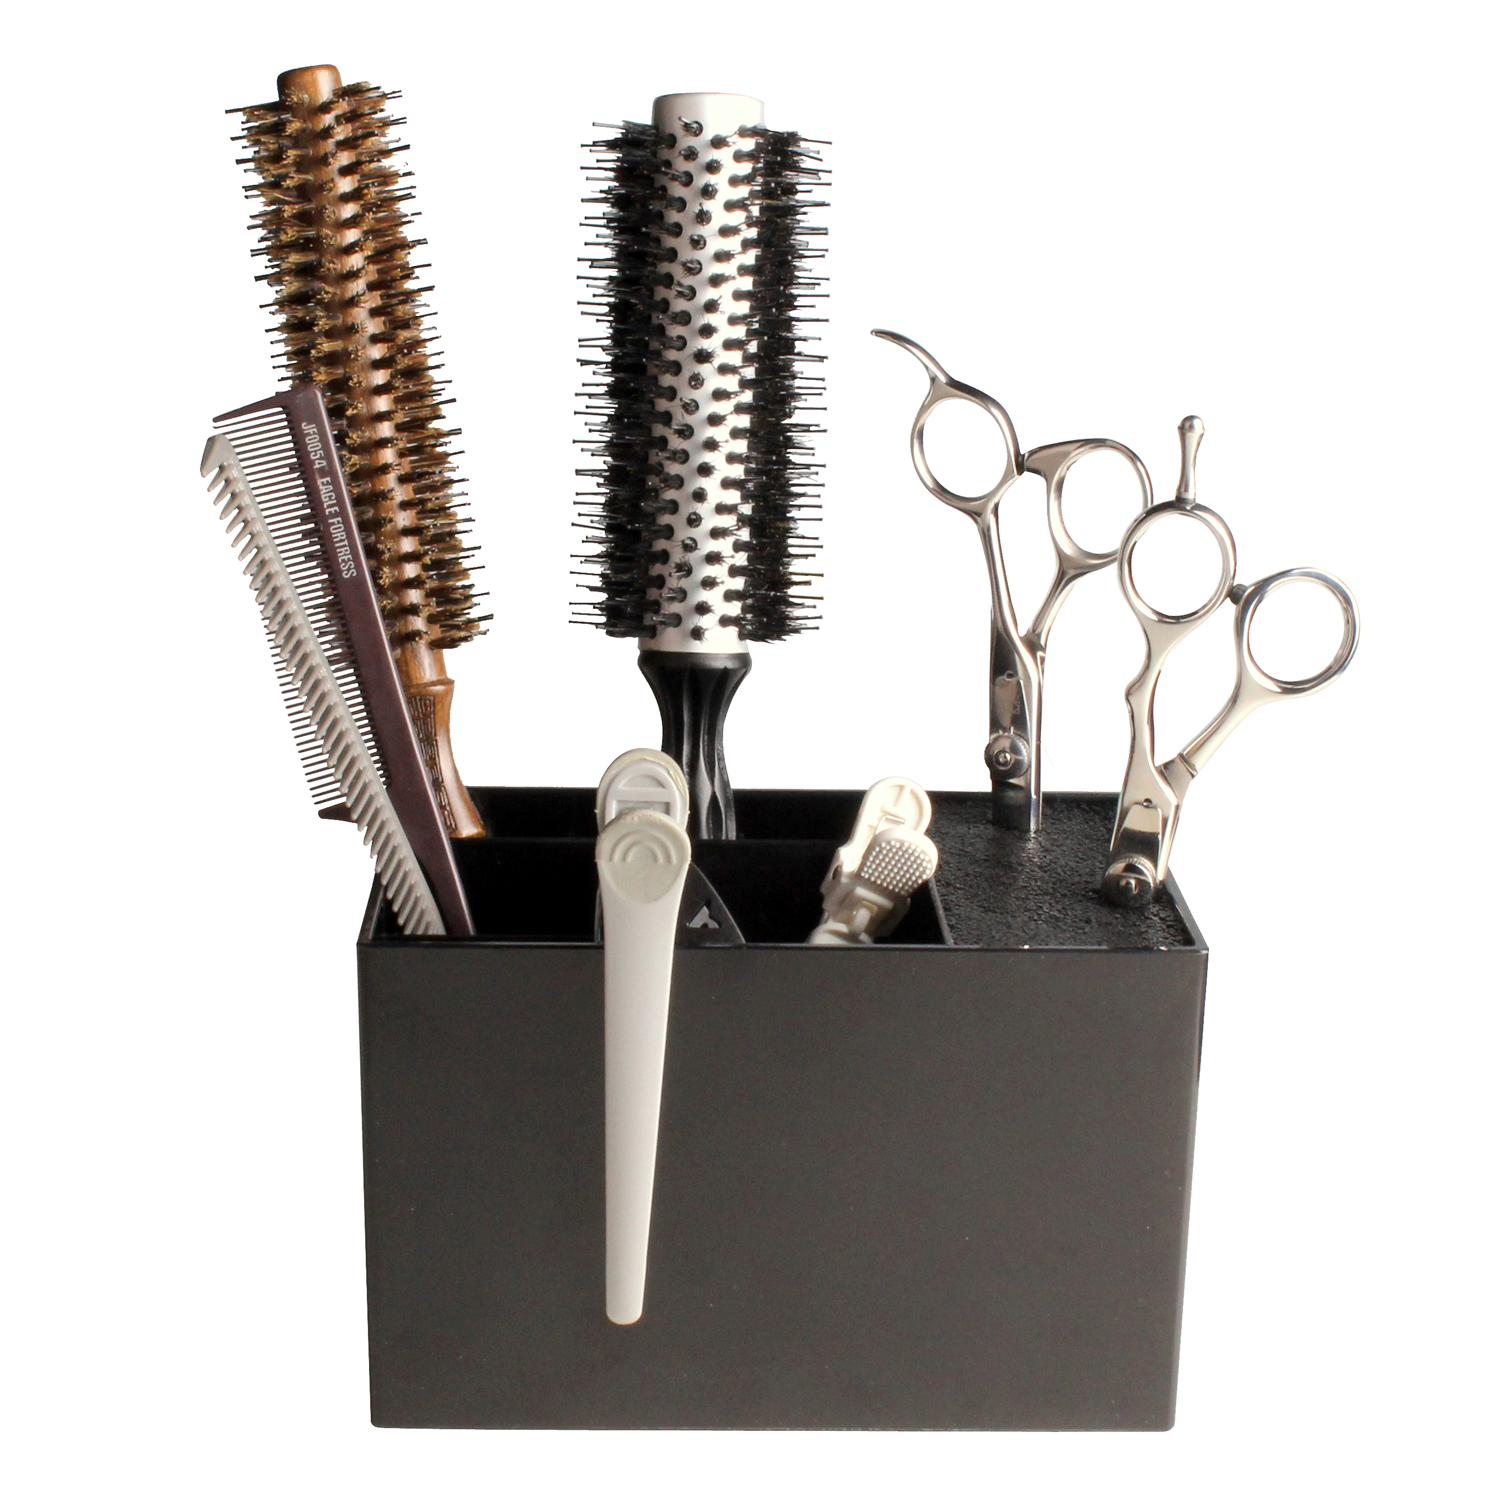 Universal stand for scissors and other hairdressing accessories